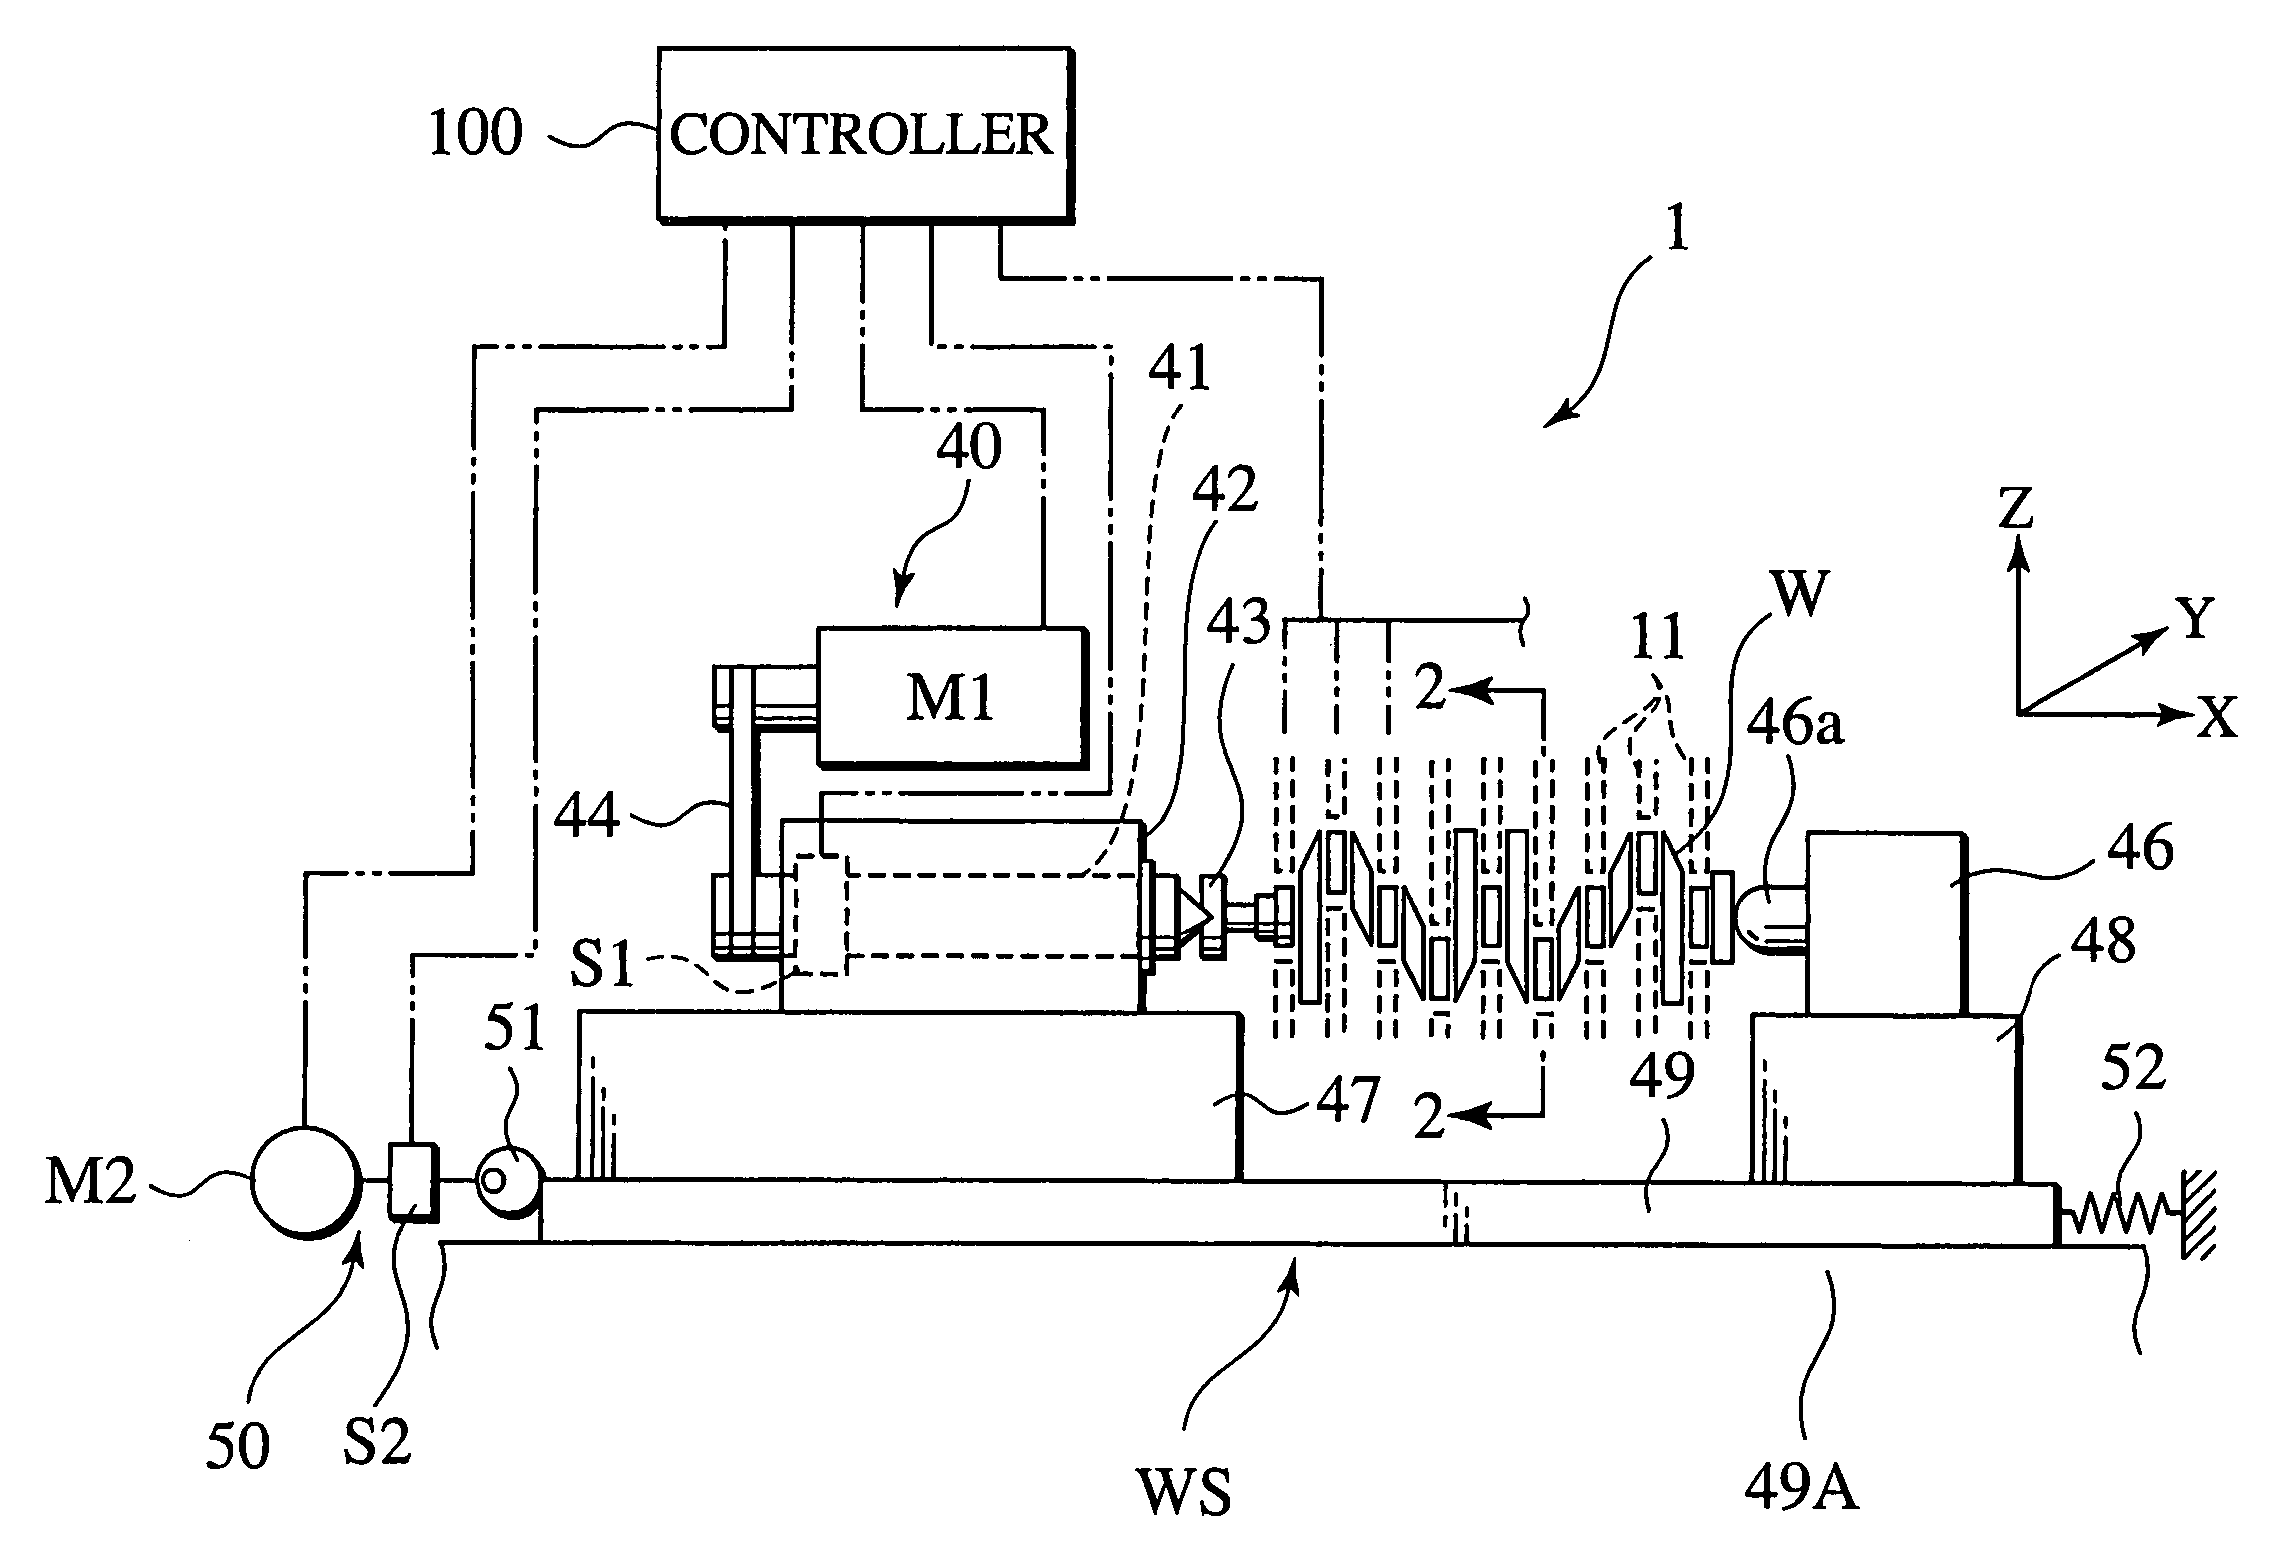 Surface finishing apparatus and related method